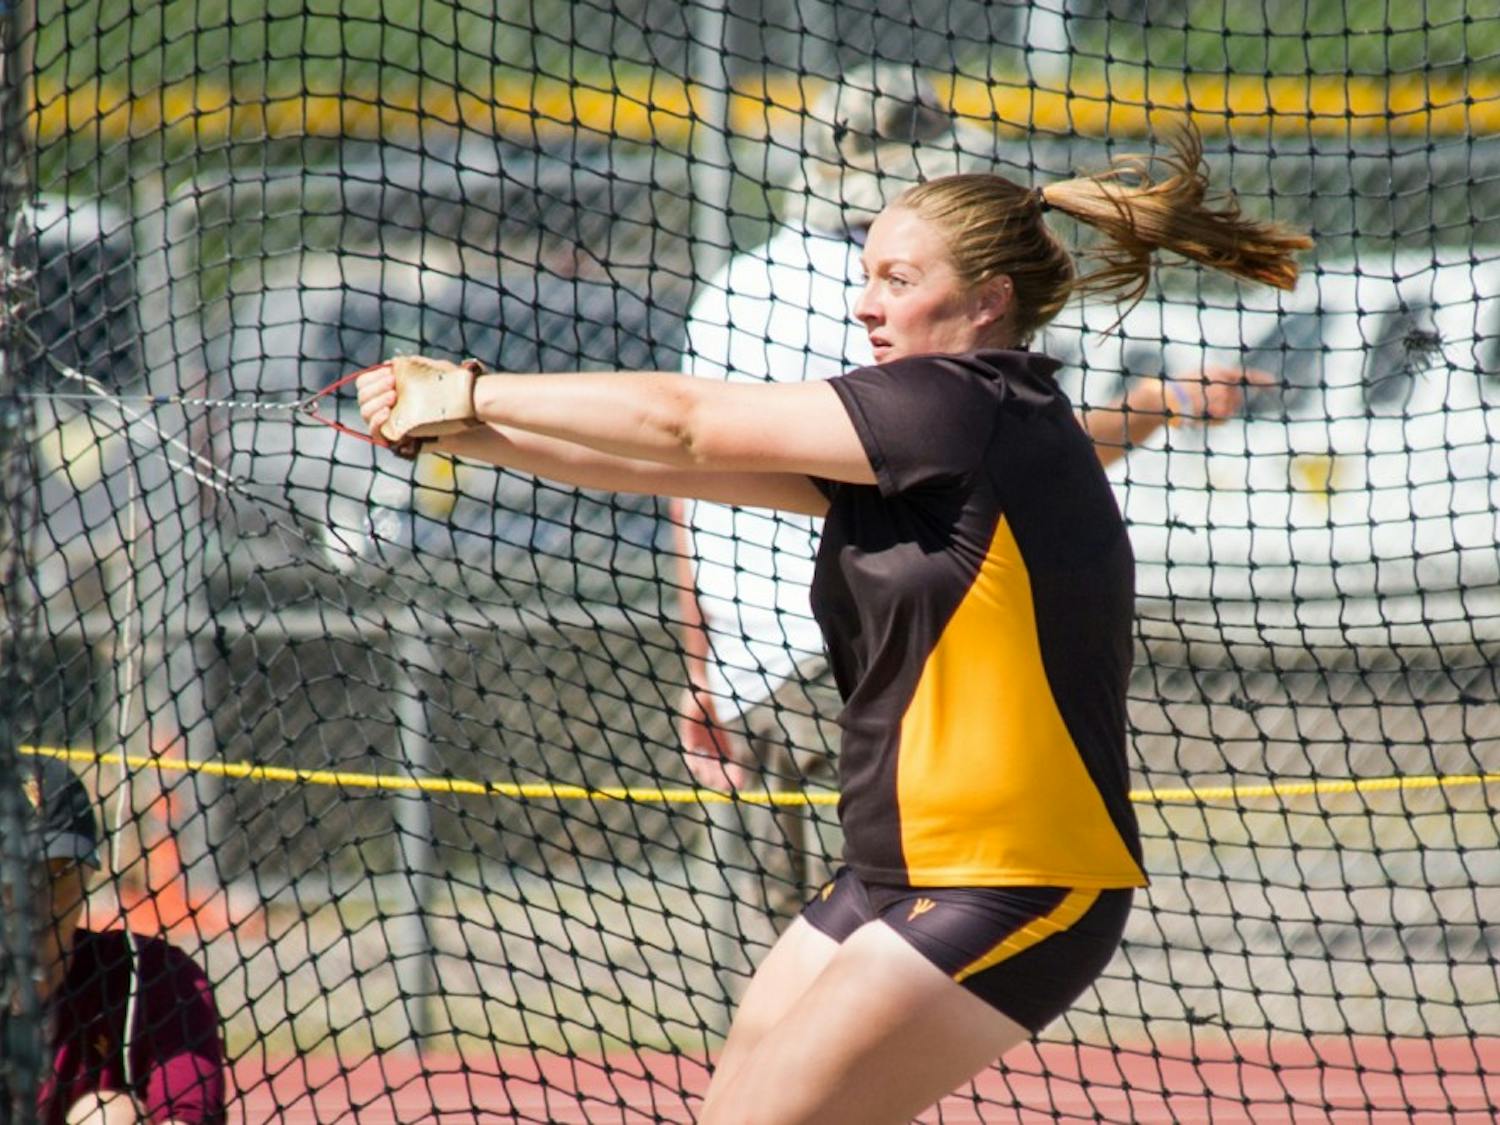 ASU track and field competes on Friday, April 8